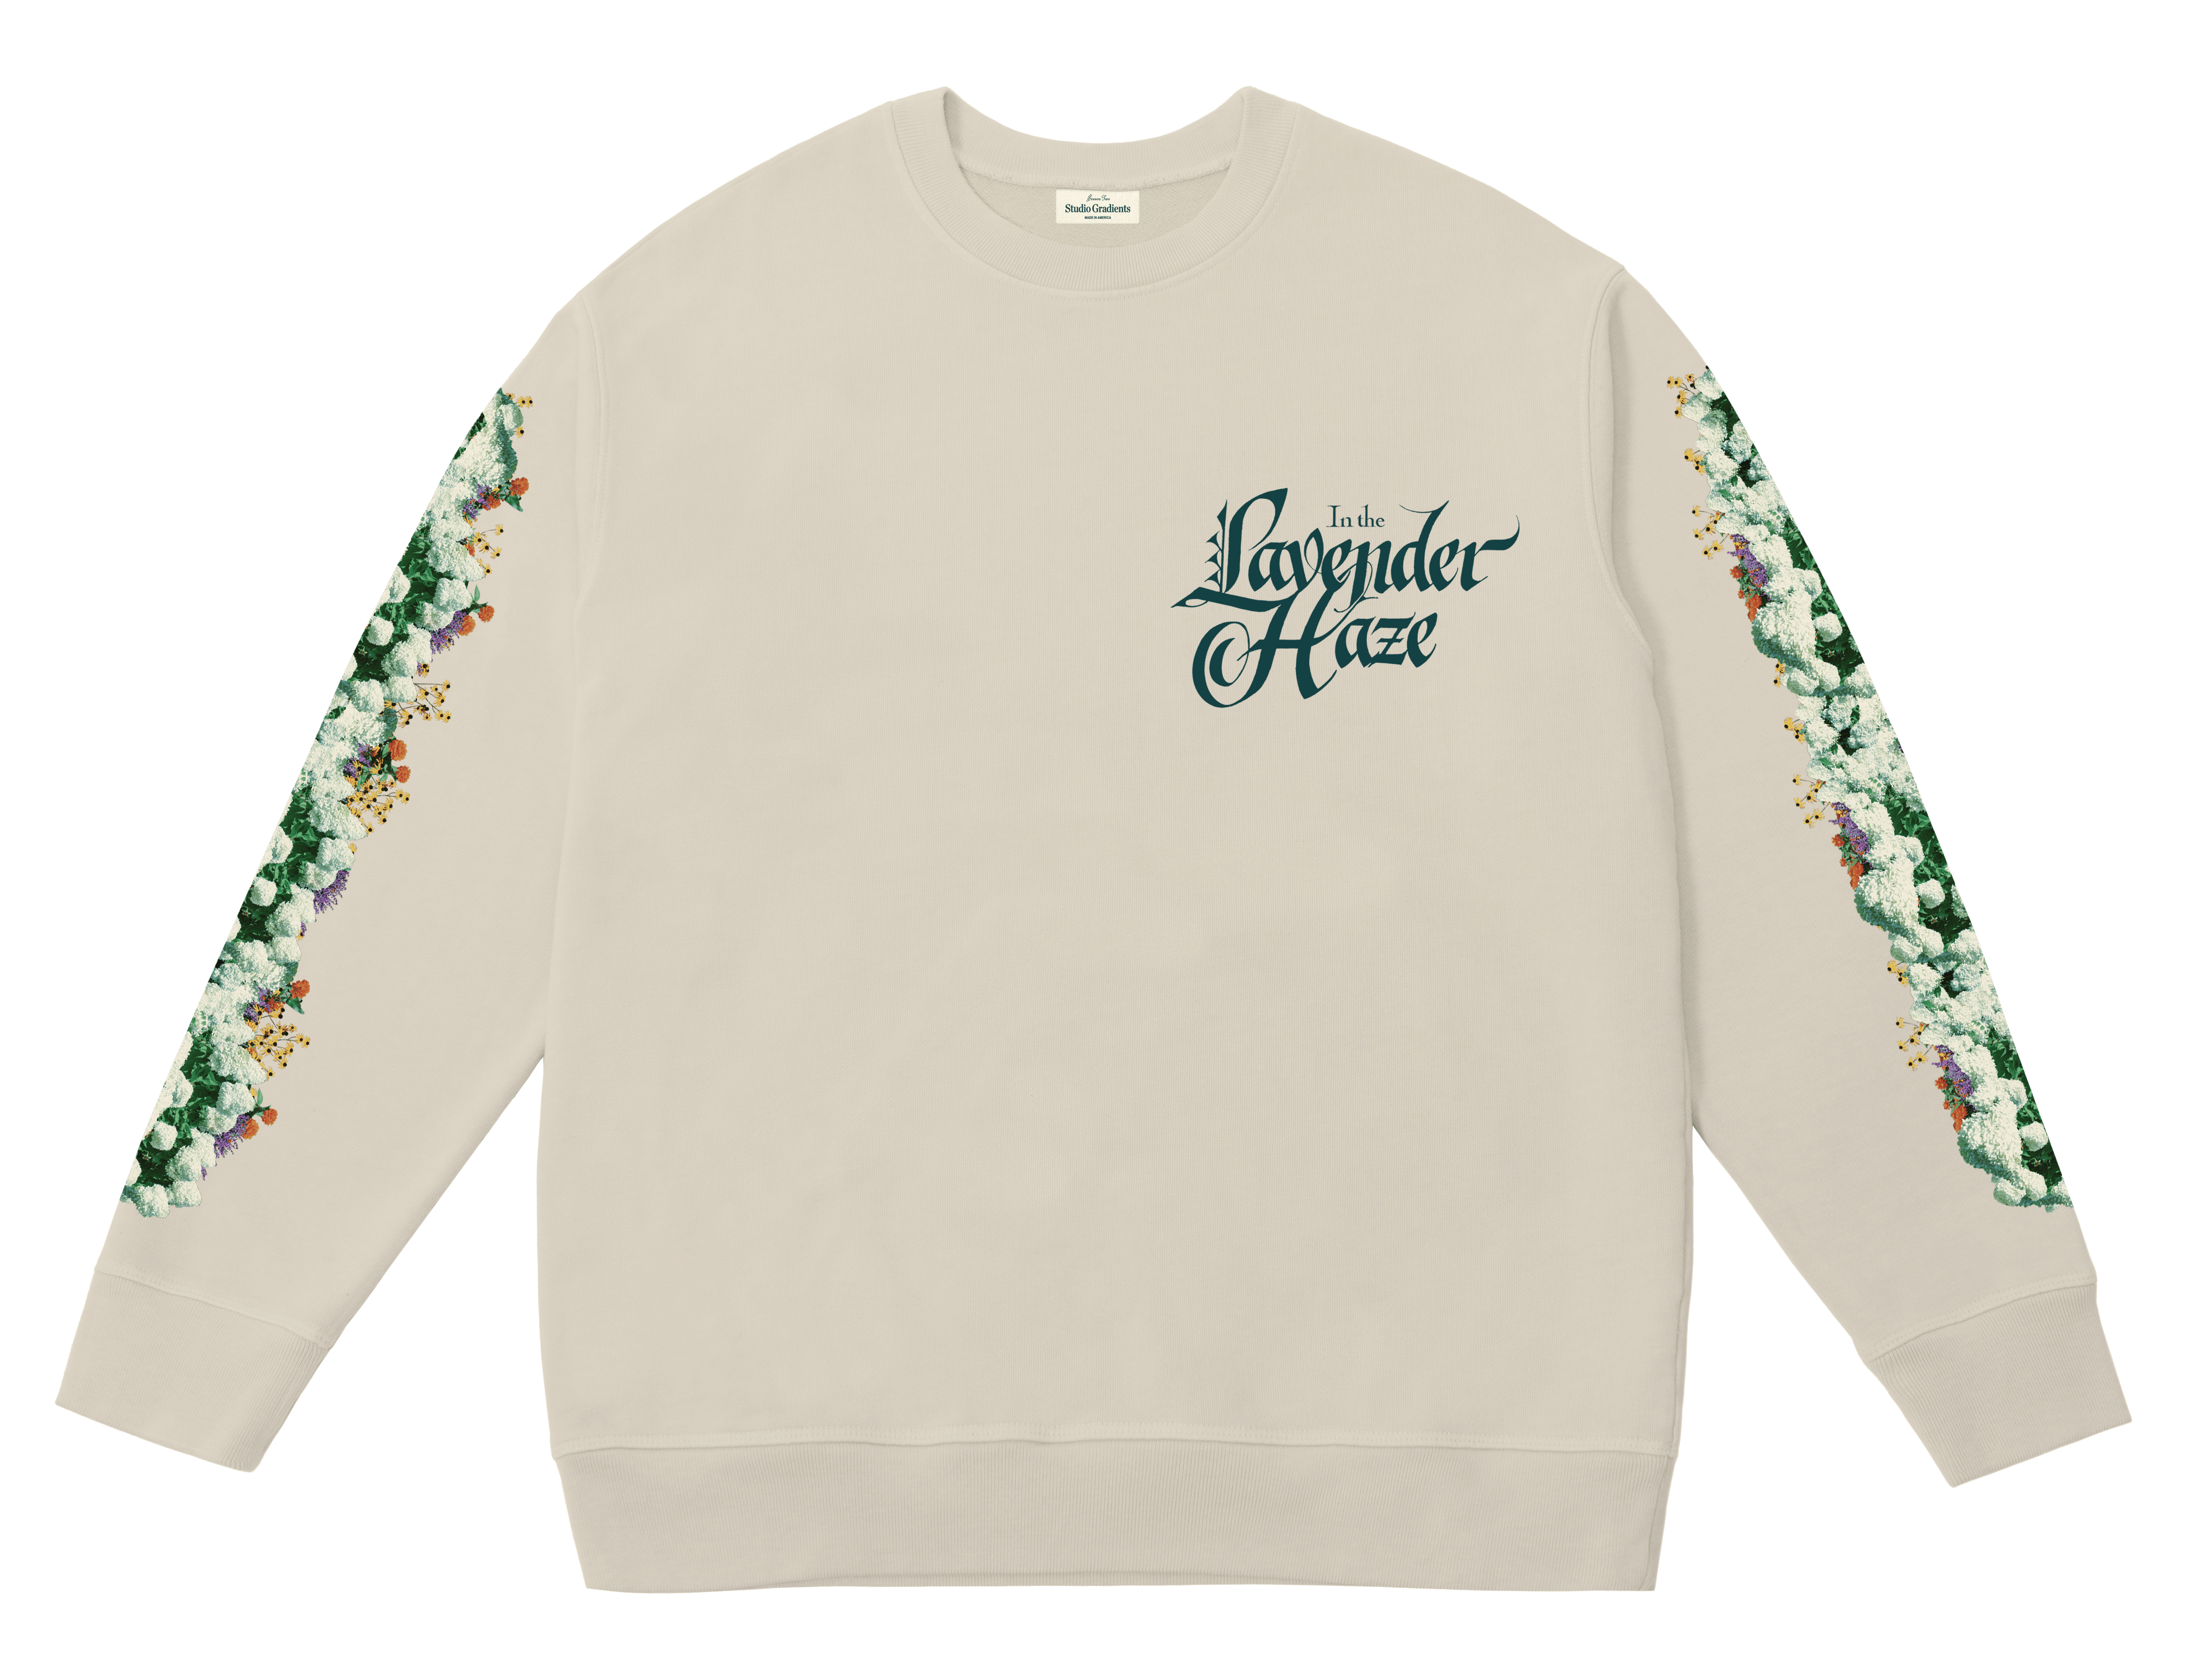 Front view of white crewneck